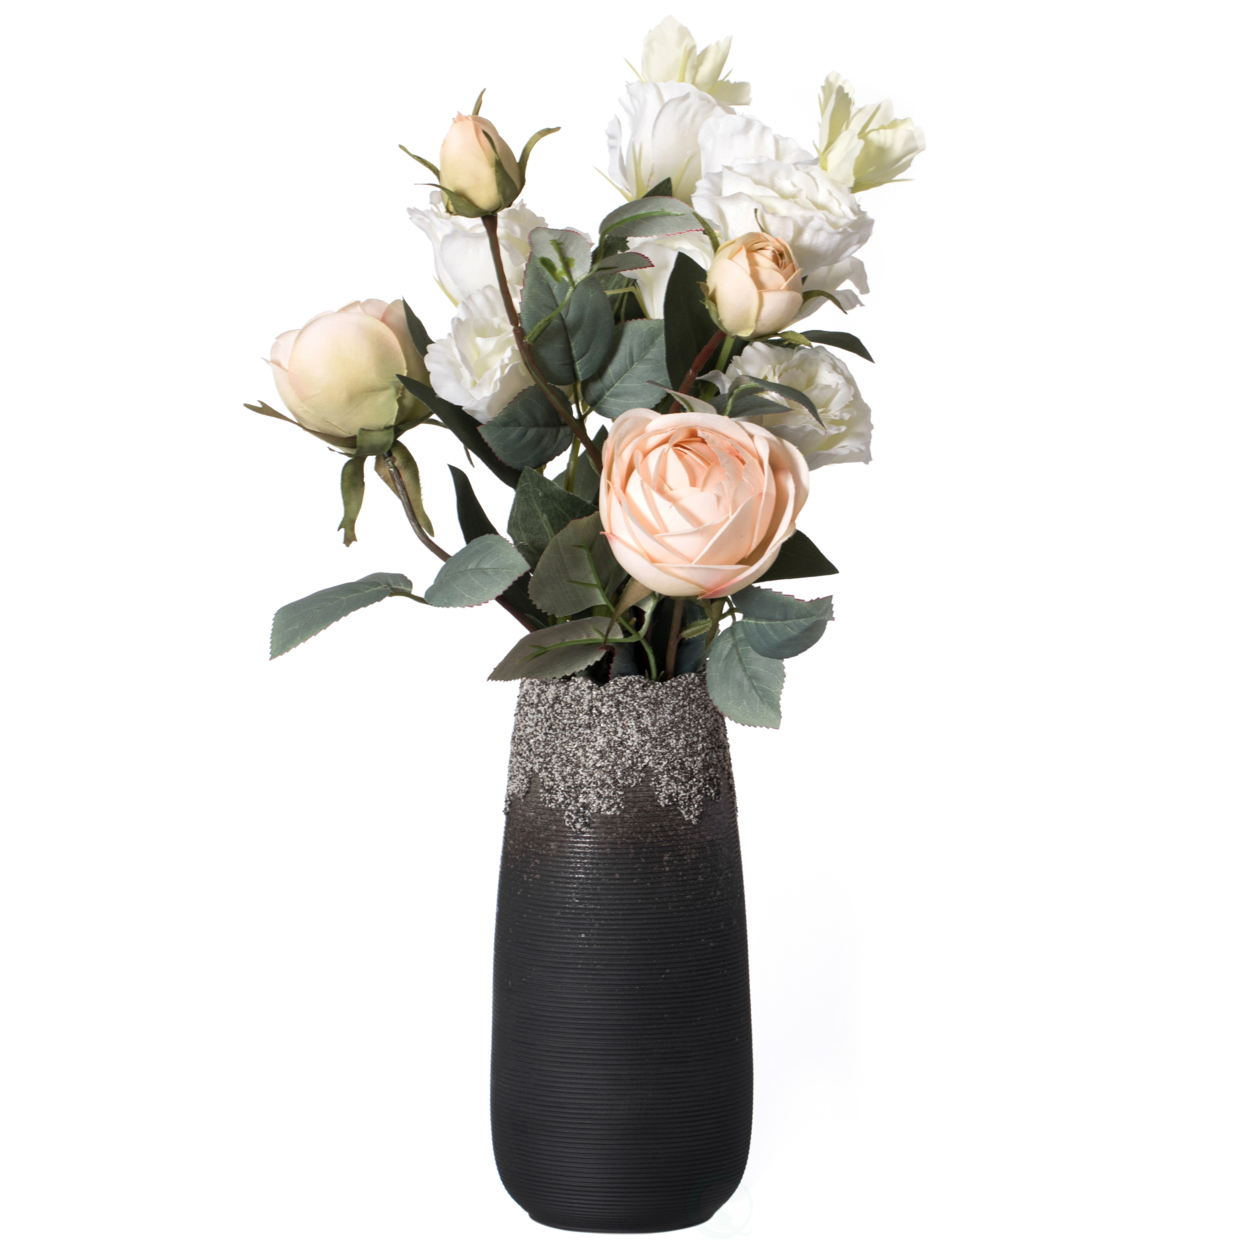 Contemporary Black Table Vase With Dripping Crystal Look And Scalloped Opening Design - Medium